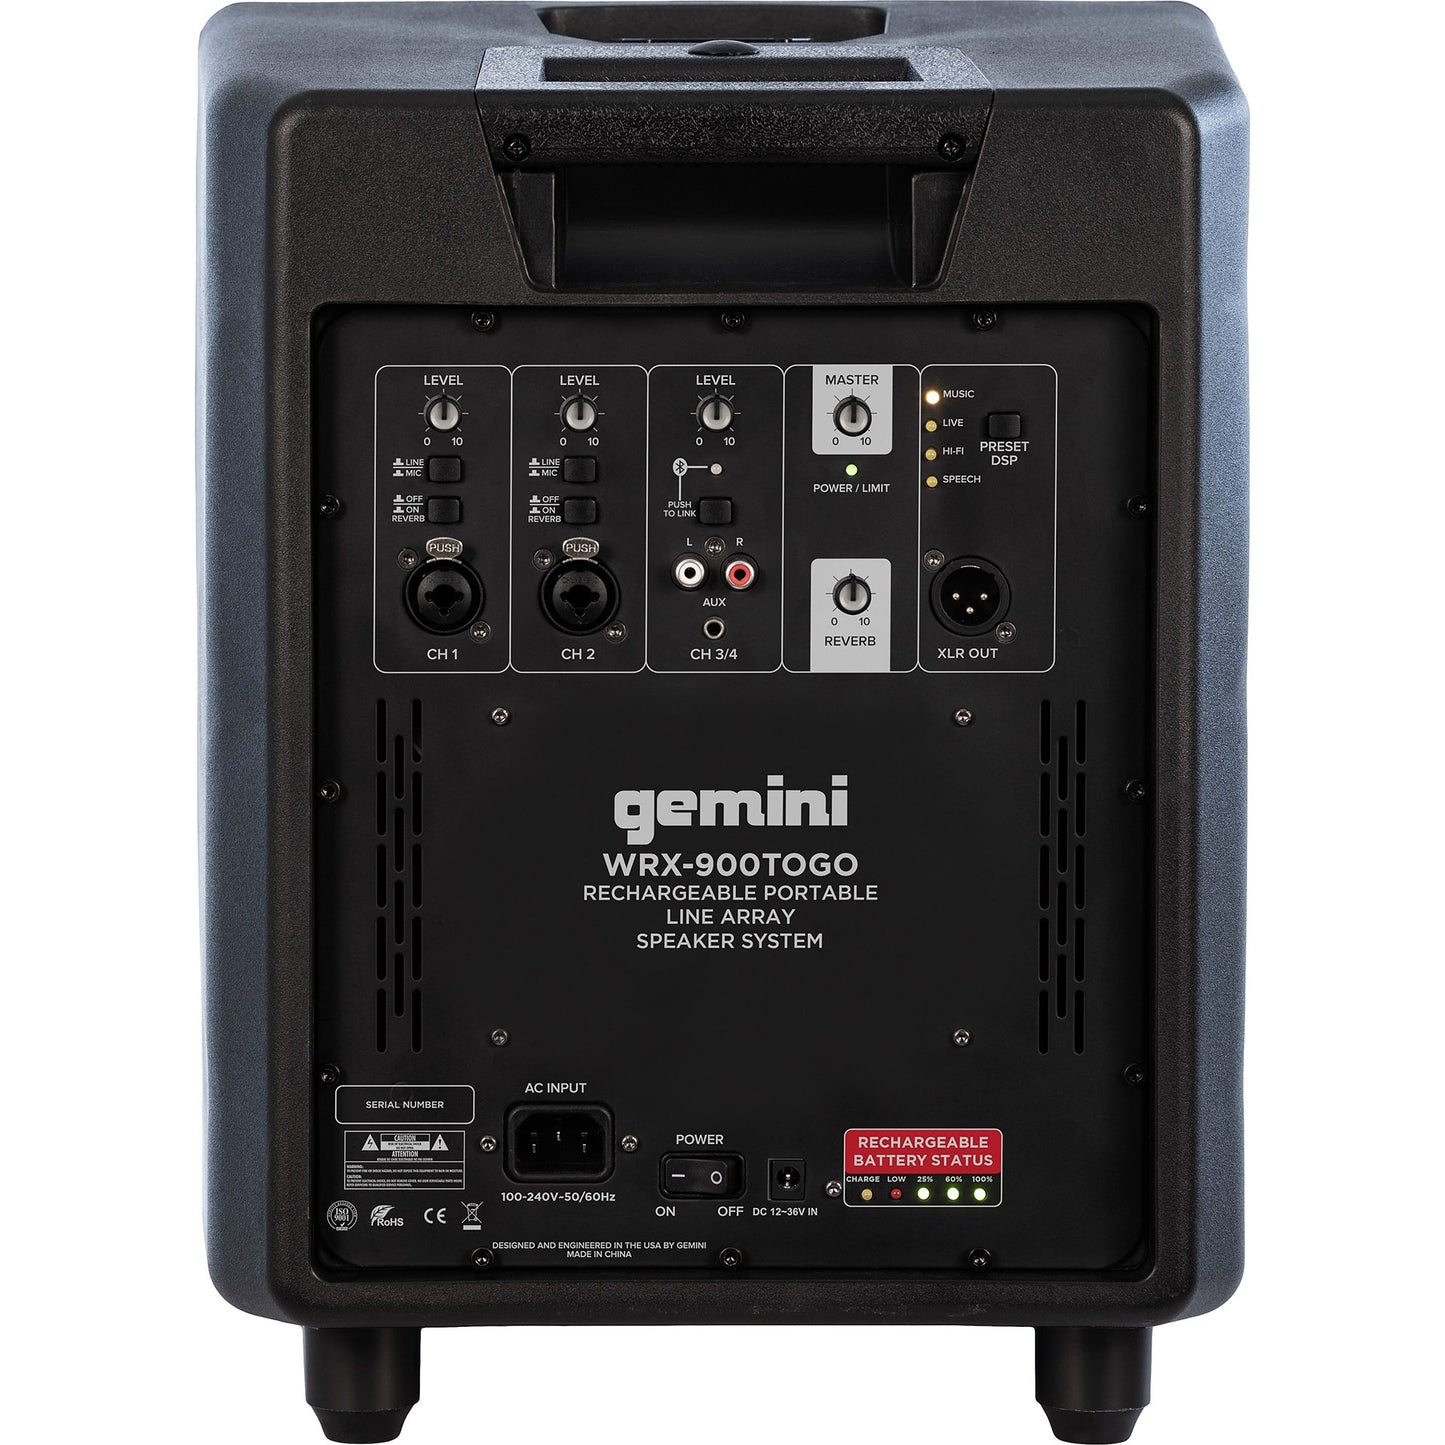 Gemini WRX-900TOGO Rechargeable Portable Line Array PA Speaker System